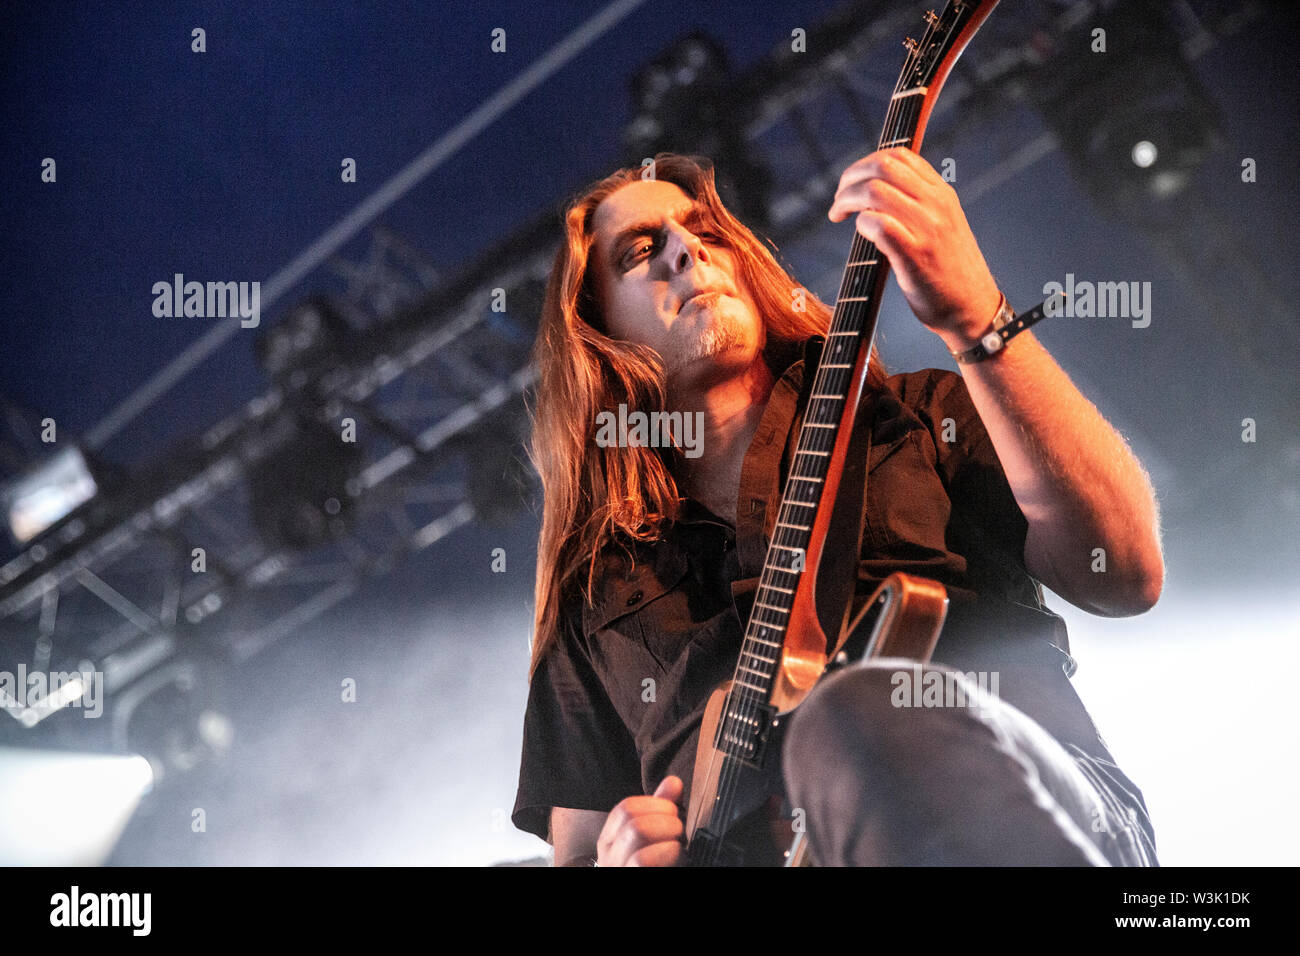 Oslo, Norway - June 27, 2019. The Norwegian black metal band Satyricon performs a live concert during the Norwegian music festival Tons of Rock 2019 in Oslo. (Photo credit: Gonzales Photo - Terje Dokken). Stock Photo